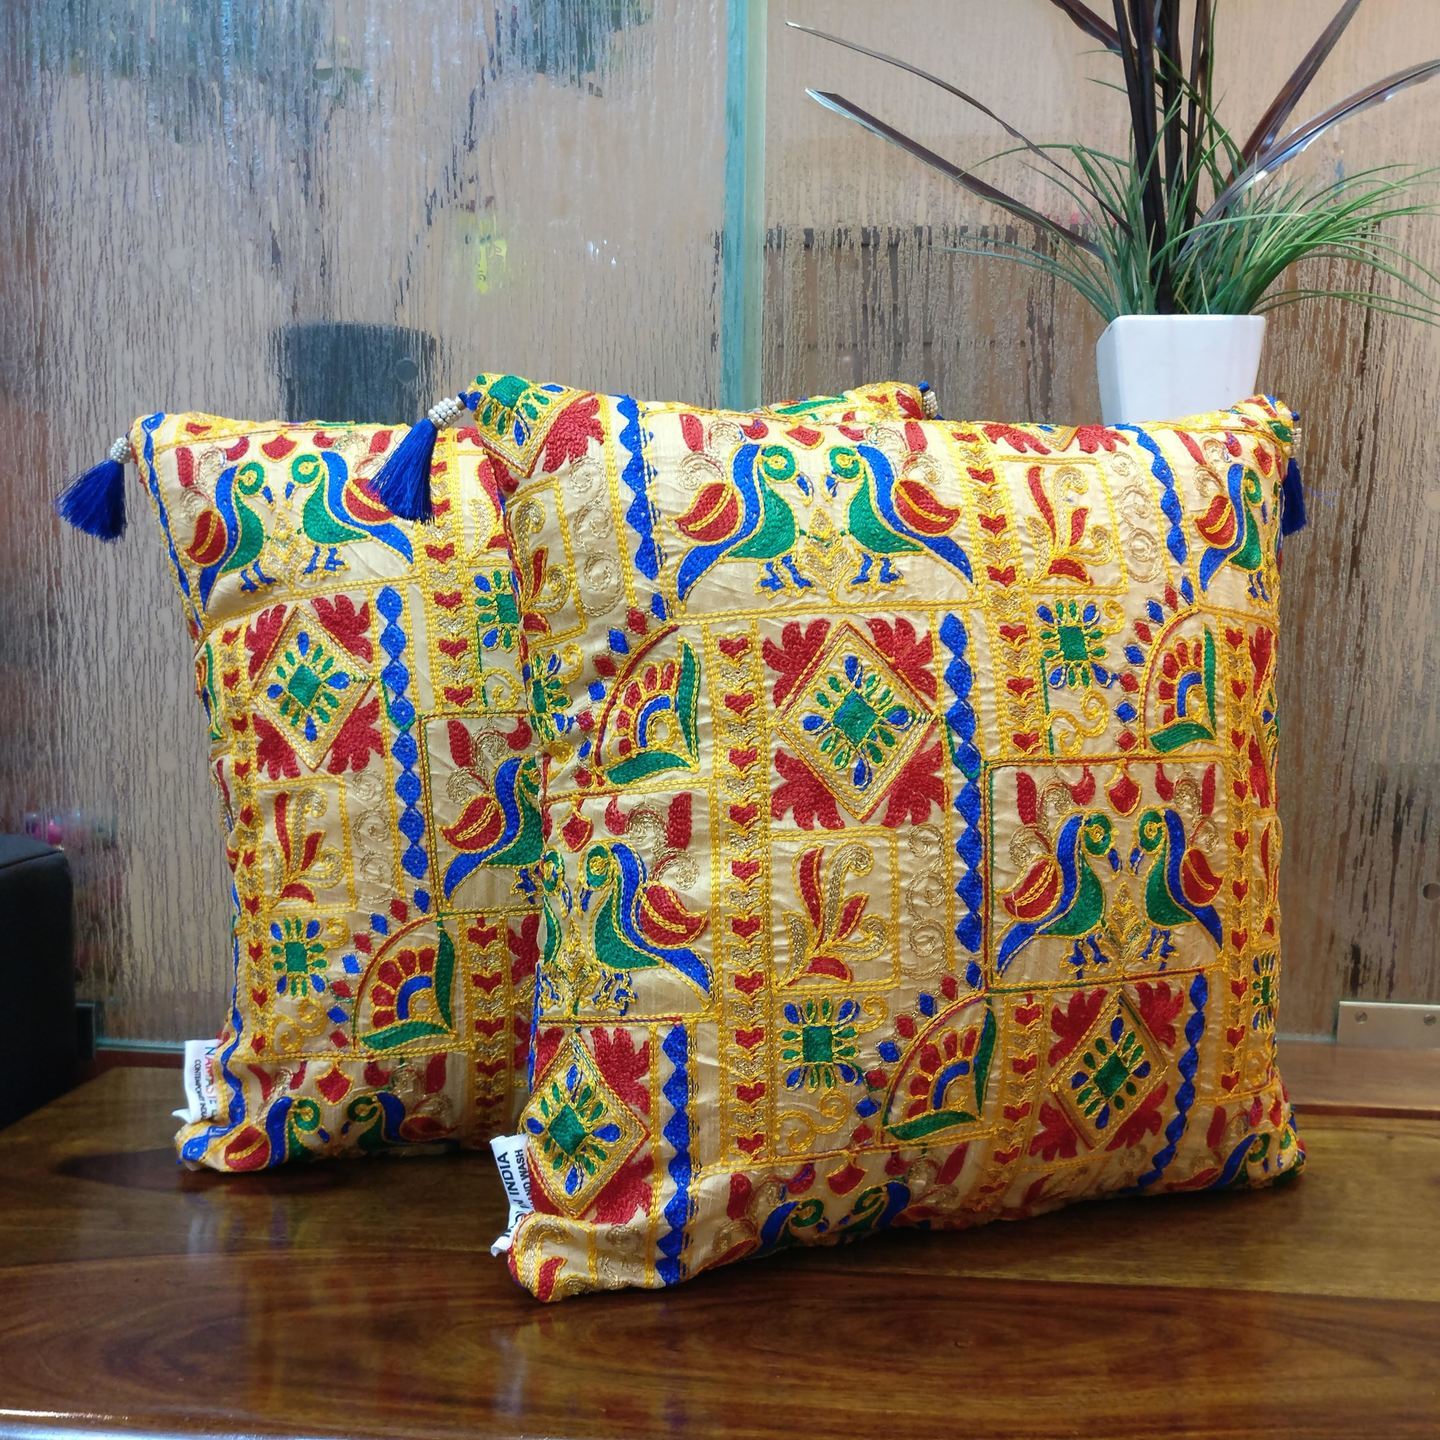 Rajasthani style Embroidery Cushion Cover